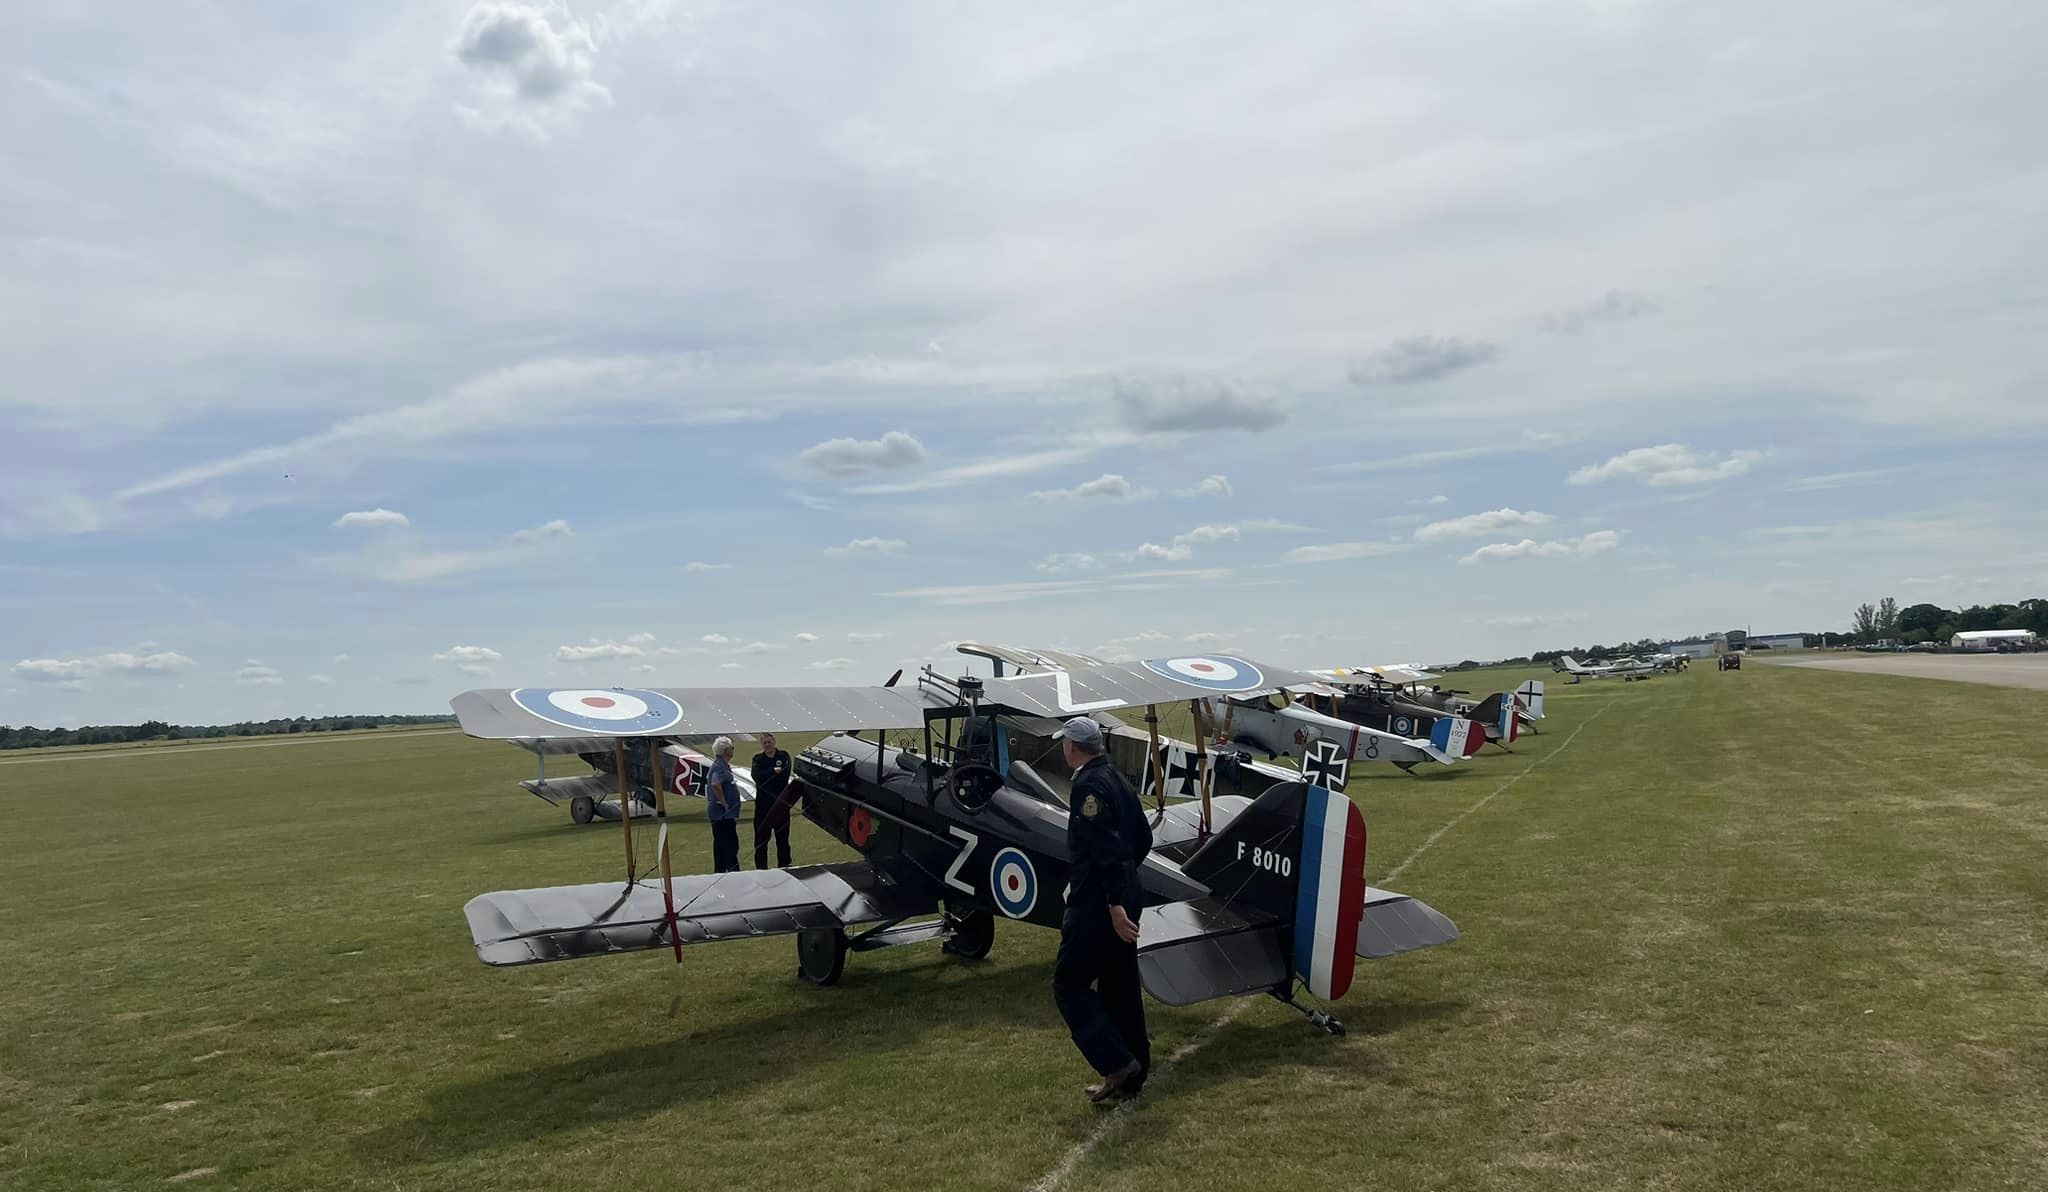 The Great War Display Team is flying at Southport Air Show